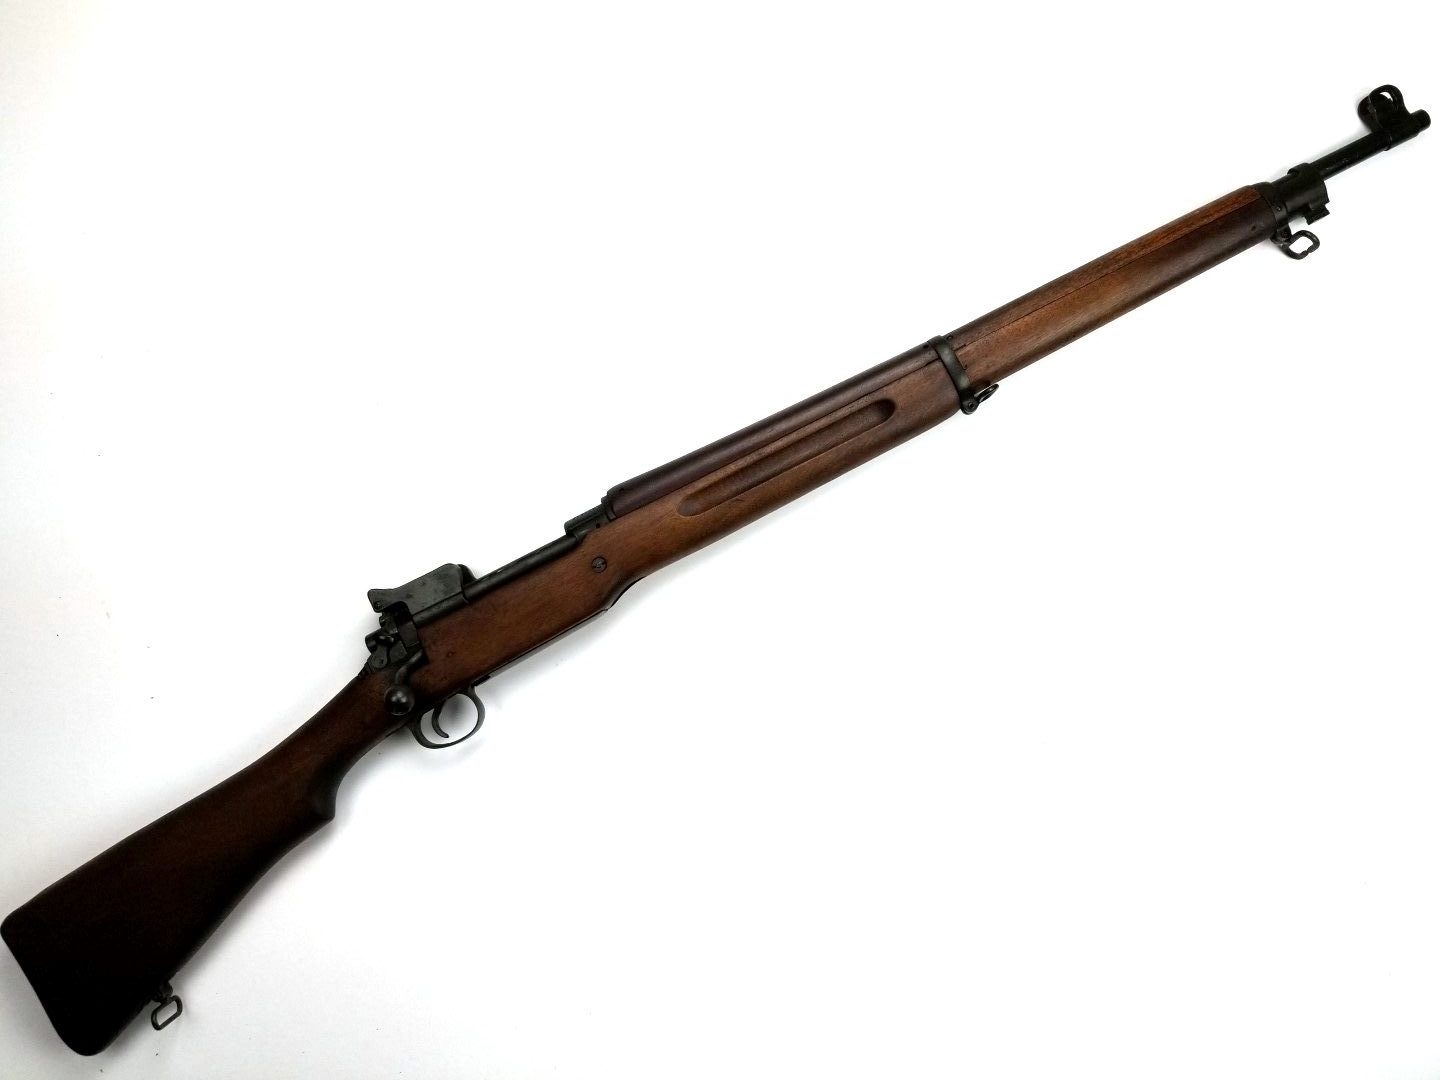 1917 Winchester sn 212112